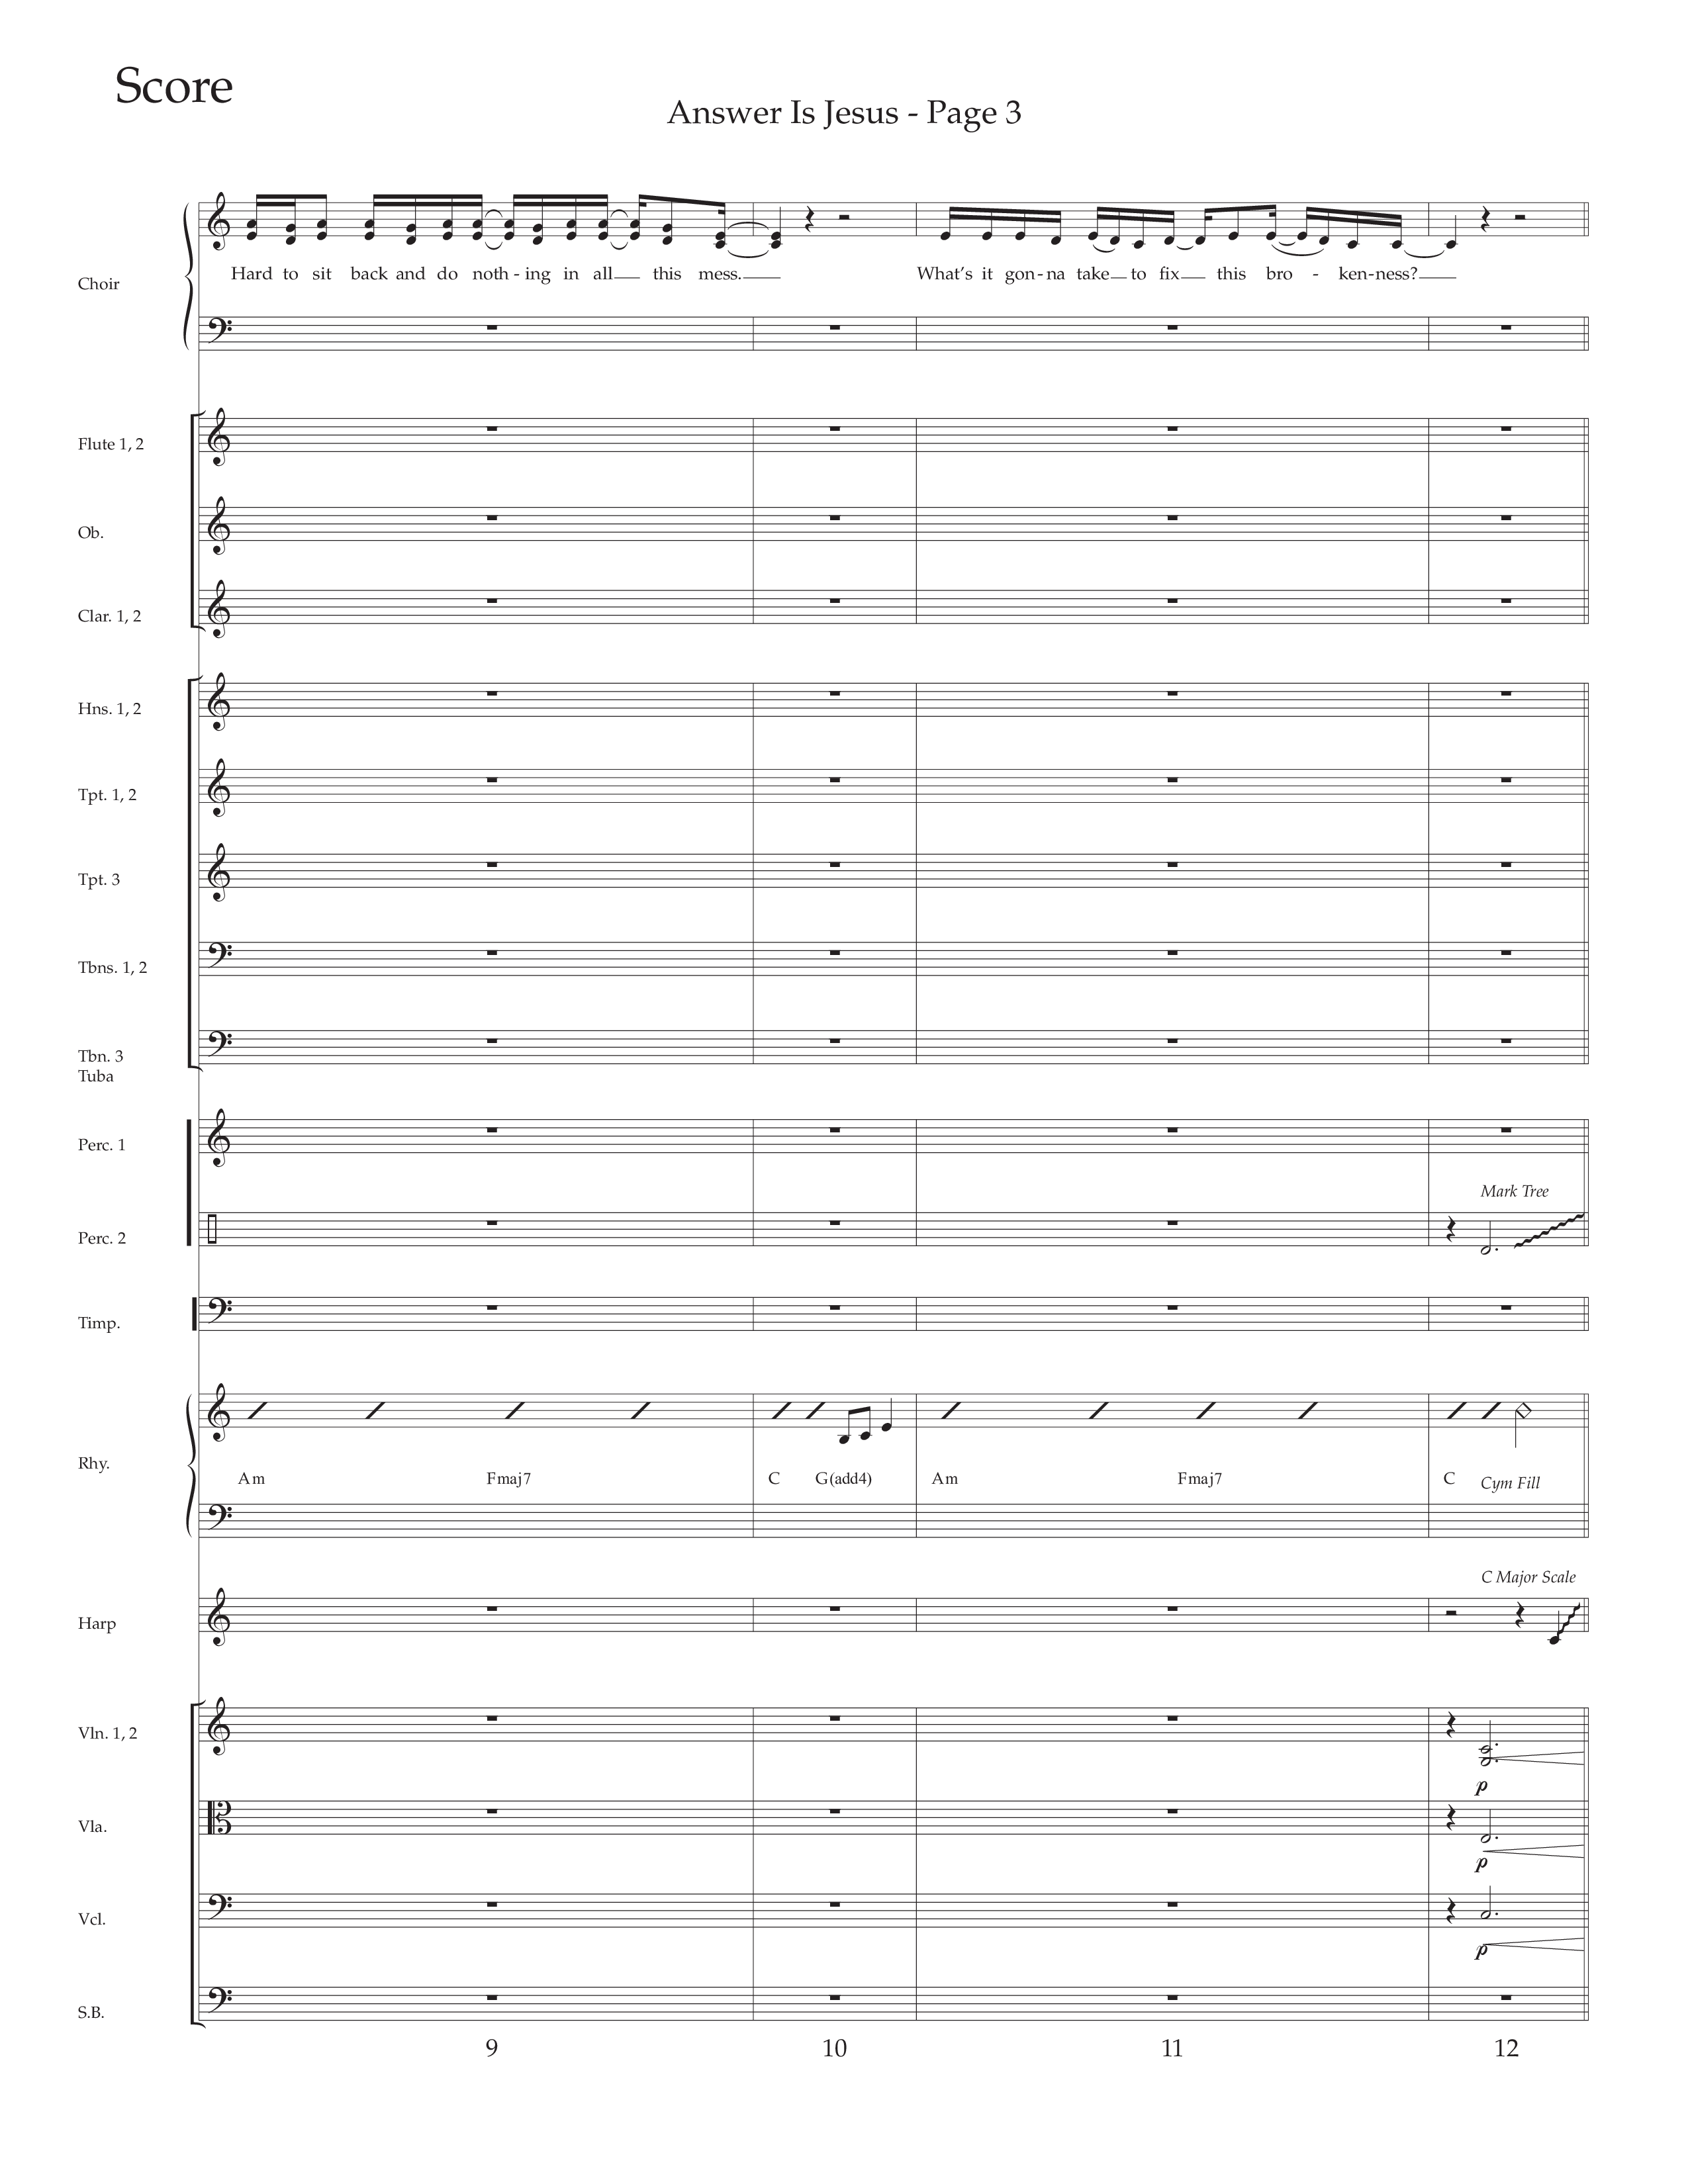 Answer Is Jesus (Choral Anthem SATB) Orchestration (Daywind Worship / Arr. Marty Hamby)